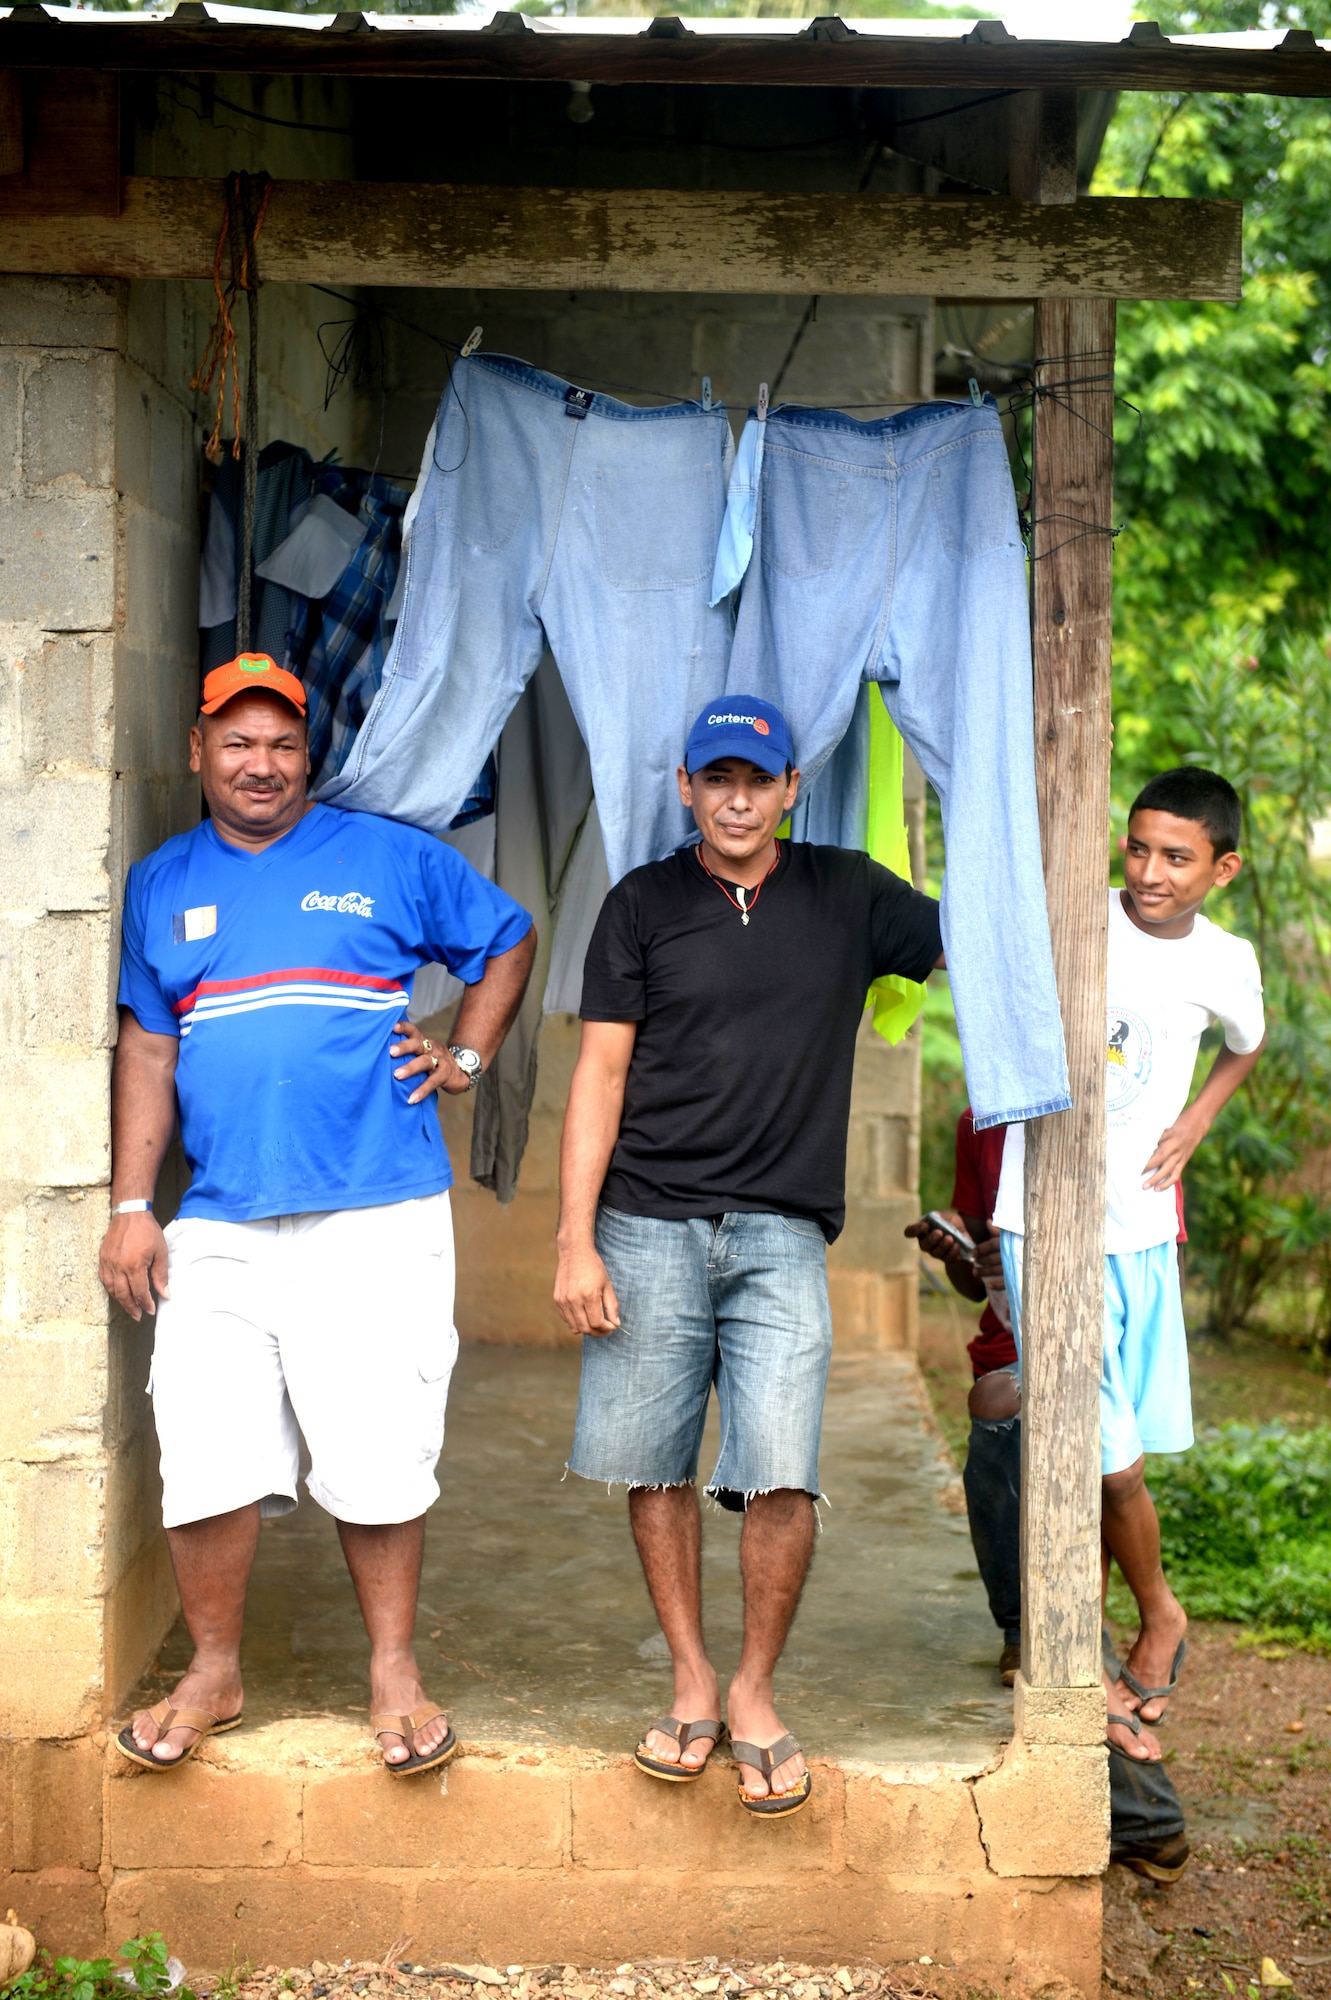 Honduras Aguan residents pose for a photo at the village of Honduras Aguan near Trujillo, Honduras, June 25, 2015. The village residents are the recipient of the new well being drilled by members of the NEW HORIZONS Honduras 2015 training exercise. NEW HORIZONS was launched in the 1980s and is an annual joint humanitarian assistance exercise that U.S. Southern Command conducts with a partner nation in Central America, South America or the Caribbean. The exercise improves joint training readiness of U.S. and partner nation civil engineers, medical professionals and support personnel through humanitarian assistance activities. (U.S. Air Force photo by Capt. David J. Murphy/Released)